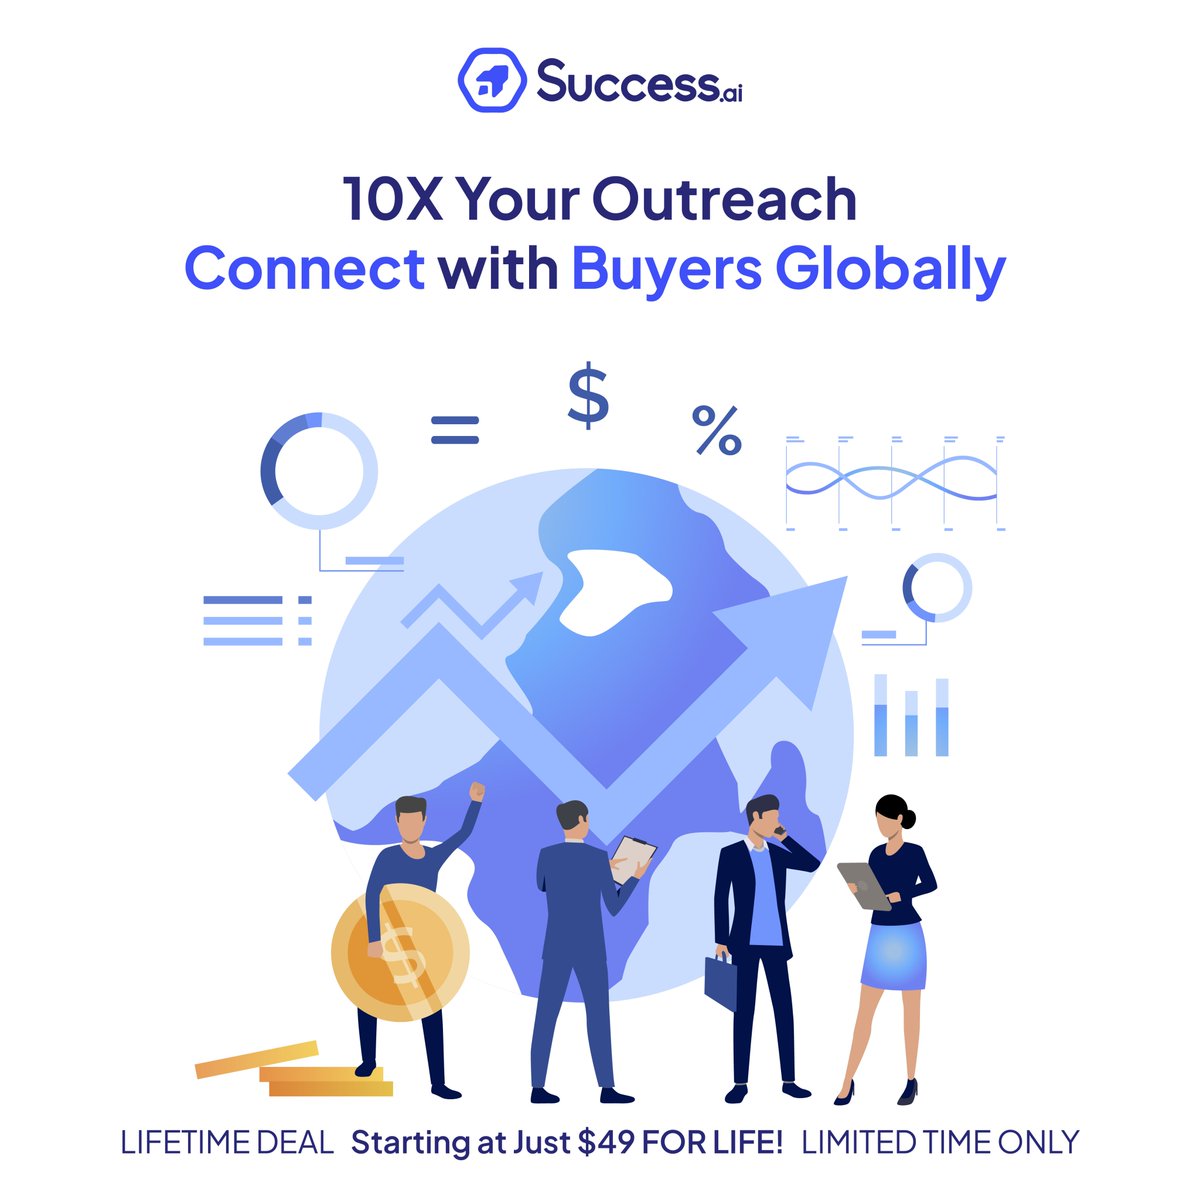 10X Your Outreach: Connect with Buyers Globally

Don't wait – this offer is for a LIMITED TIME ONLY
Grab NOW: appsumo.com/products/succe… 

#SuccessAI #BoundlessOutreach #GlobalBuyers #CostEffectiveCampaigns #PersonalizedEngagement #MarketingMastery #ReachTheWorld #UnleashPotential